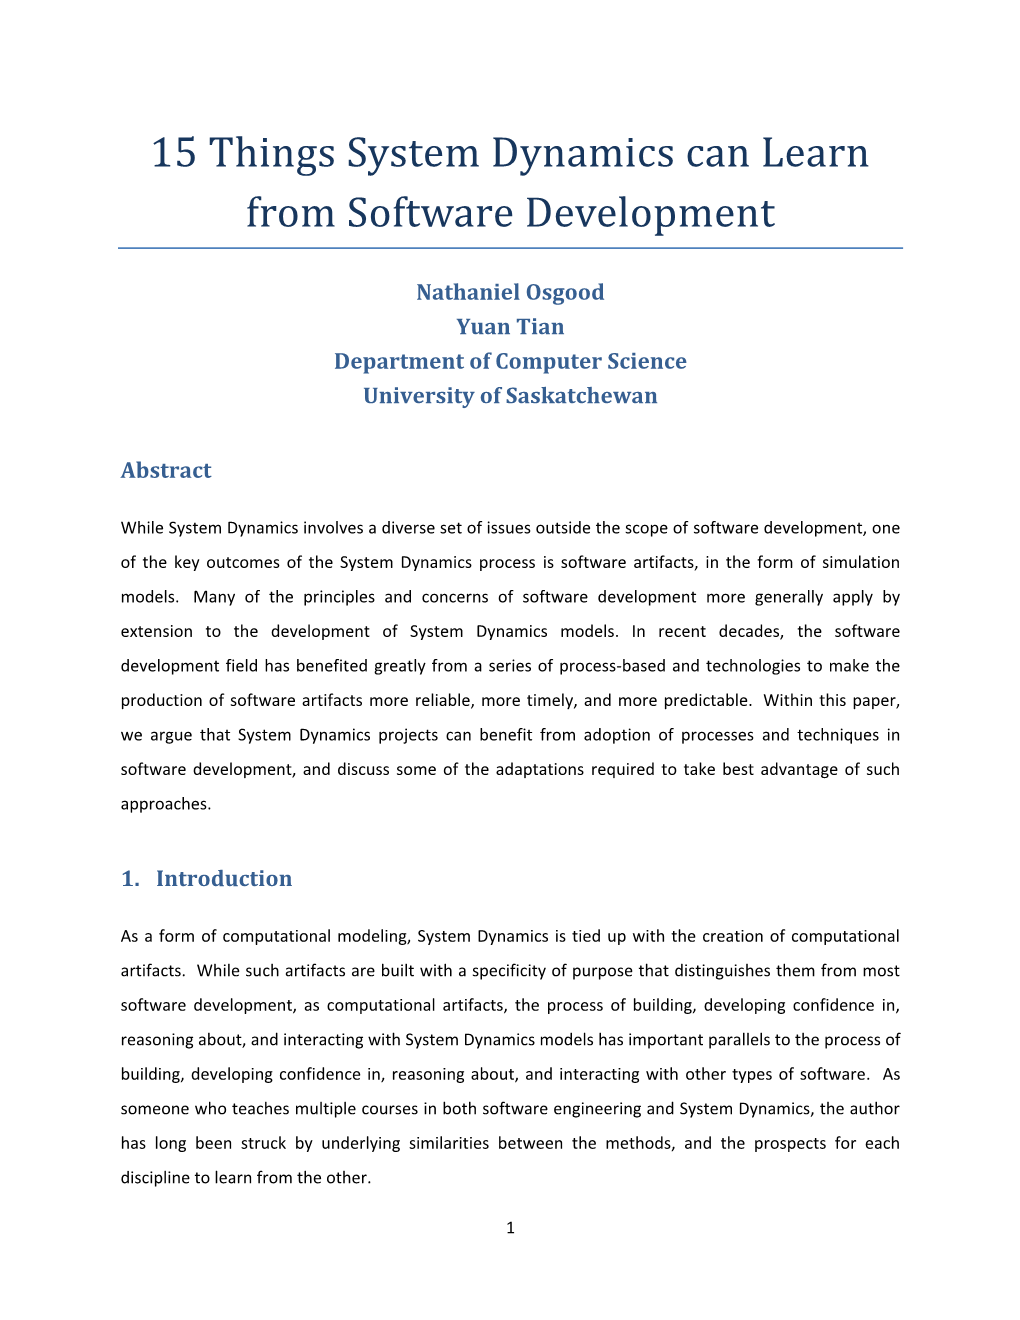 15 Things System Dynamics Can Learn from Software Development